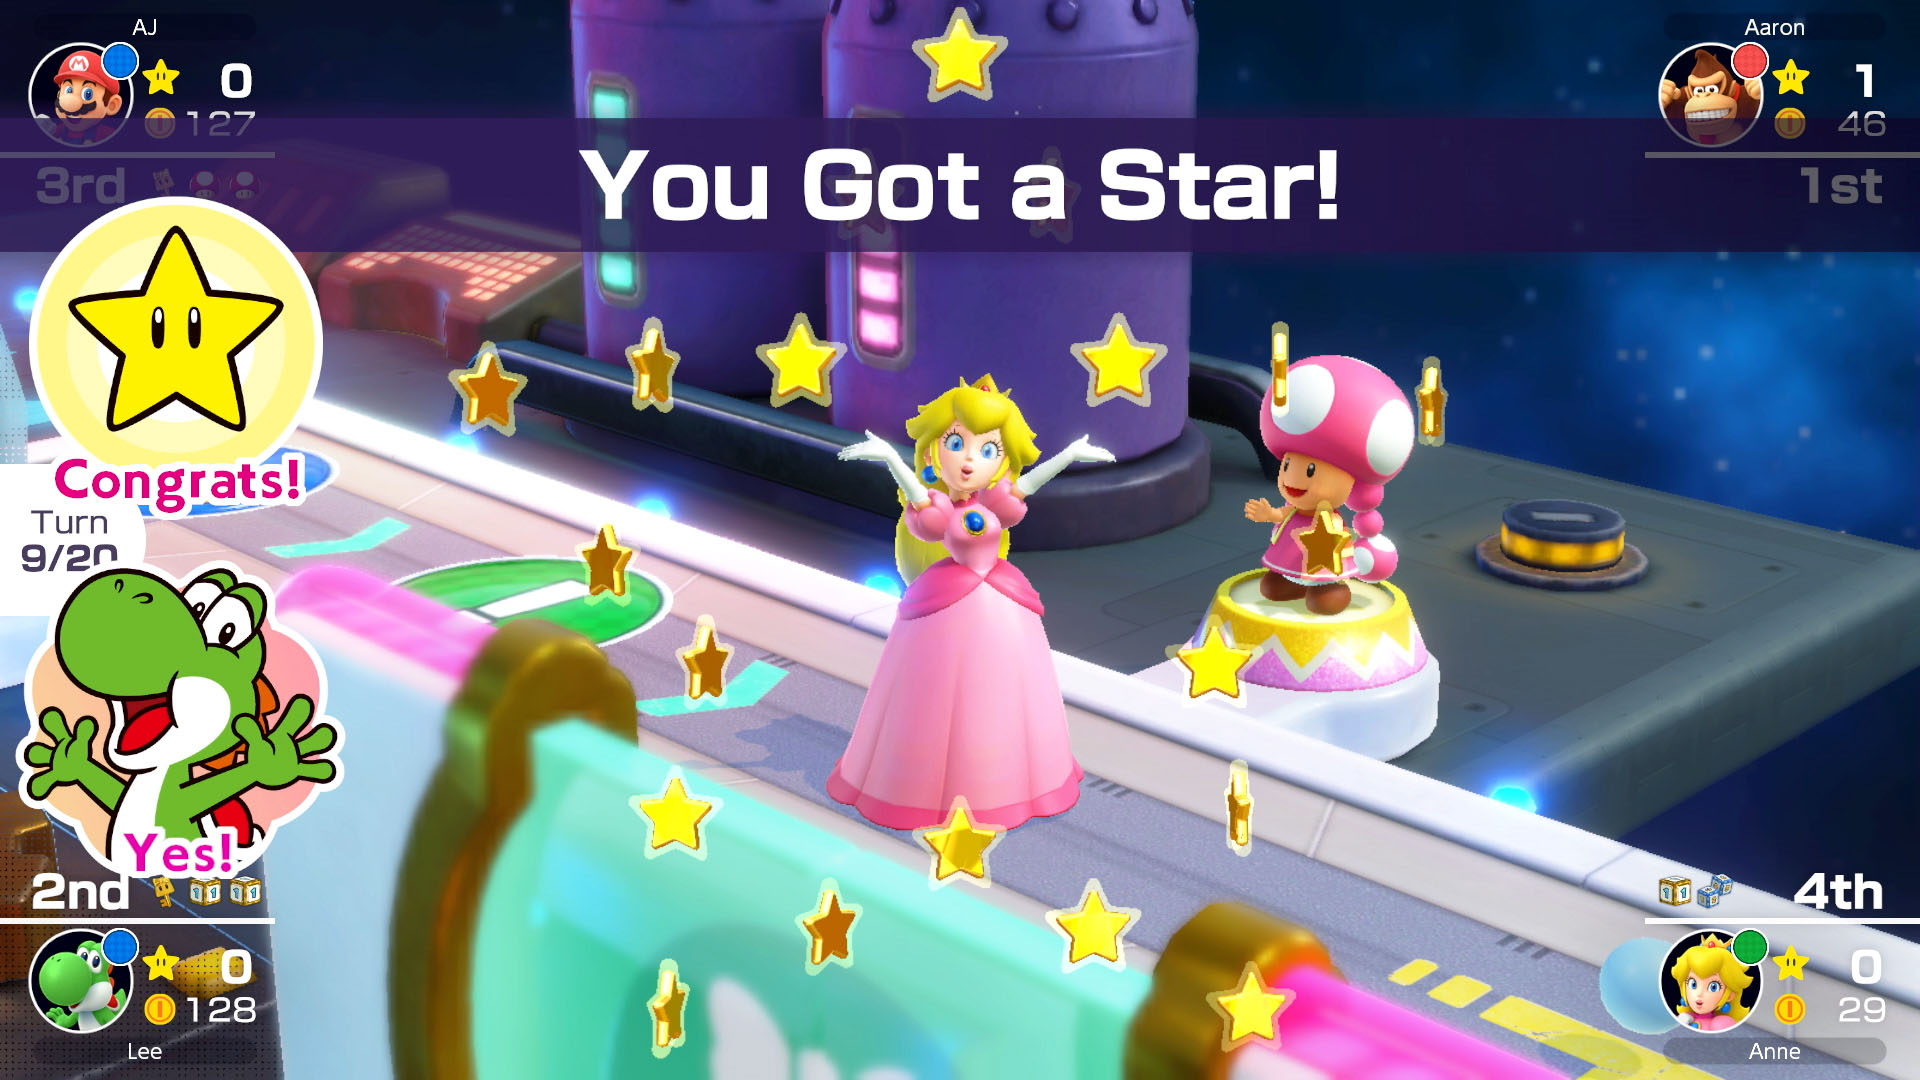 Mario Party Superstars' Peach waving her arms in the air, a banner across the screen says "you got a star!"